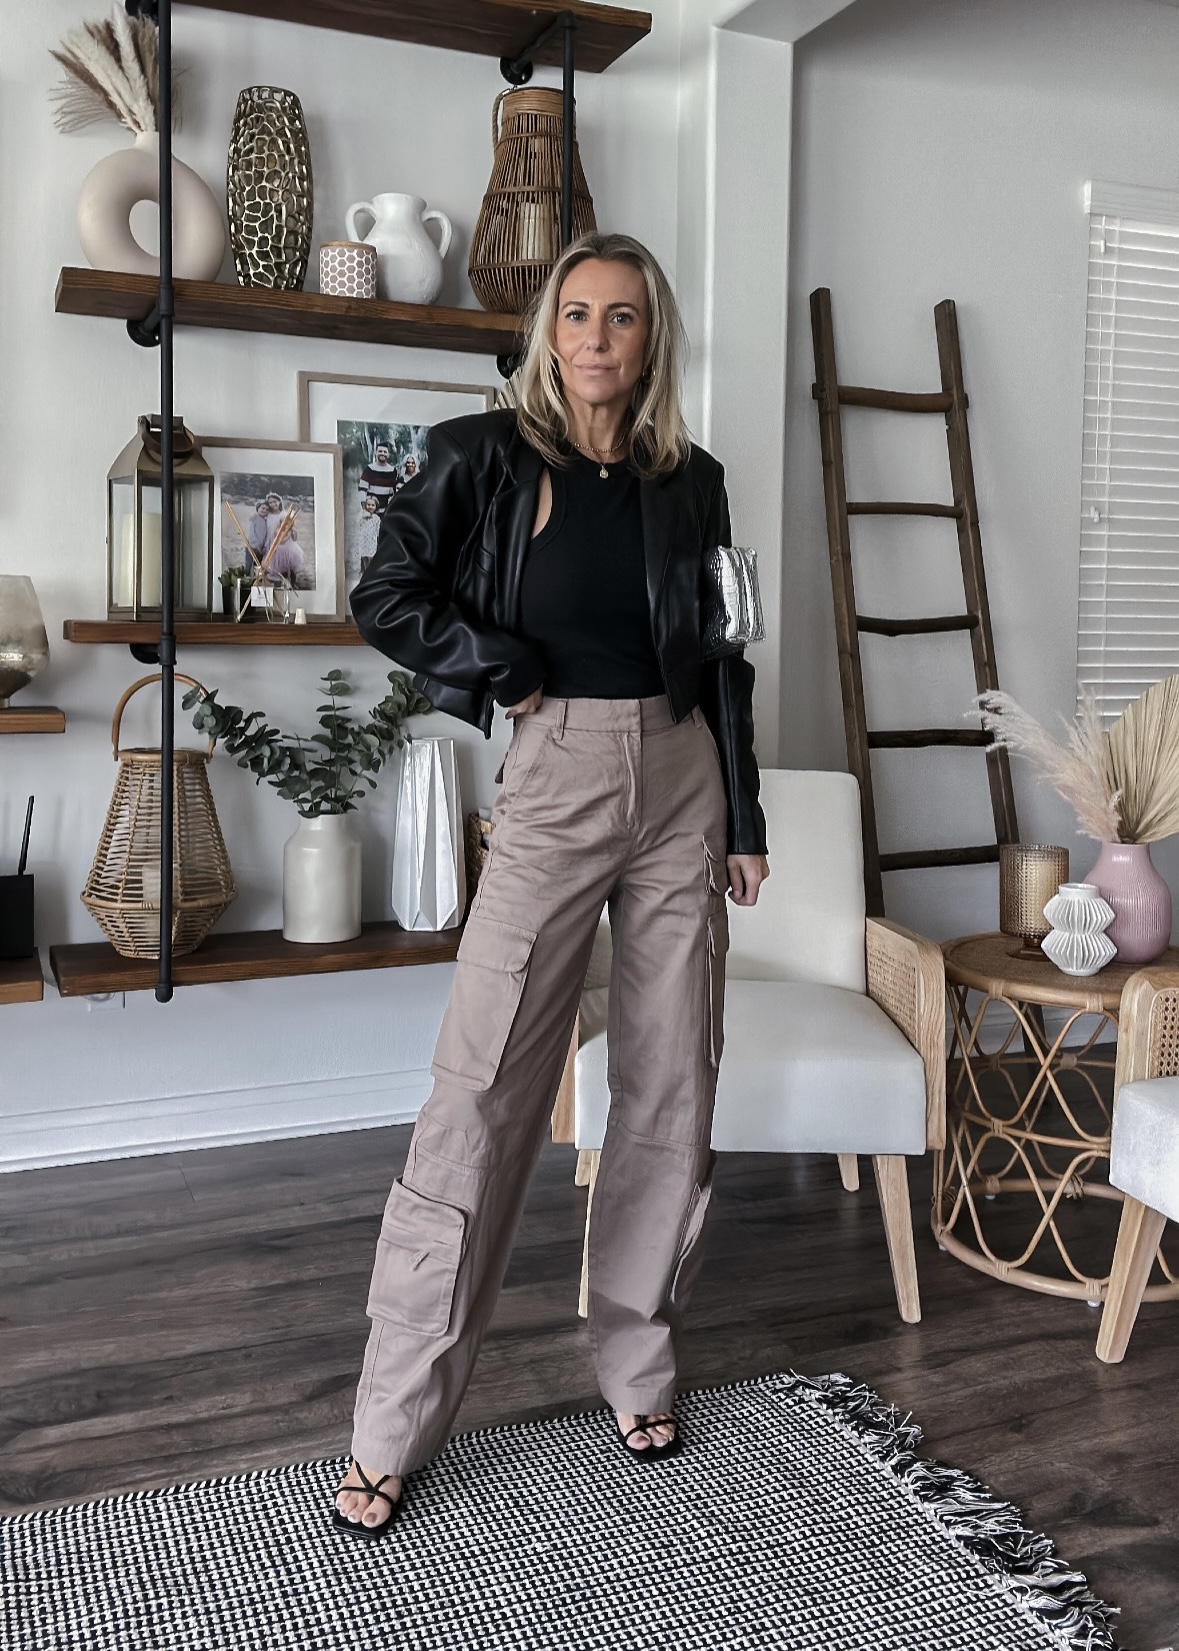 STYLING CARGO PANTS-Jaclyn De Leon style. Sharing 5 easy cargo pant outfits for every occasion from running errands to a work meeting.